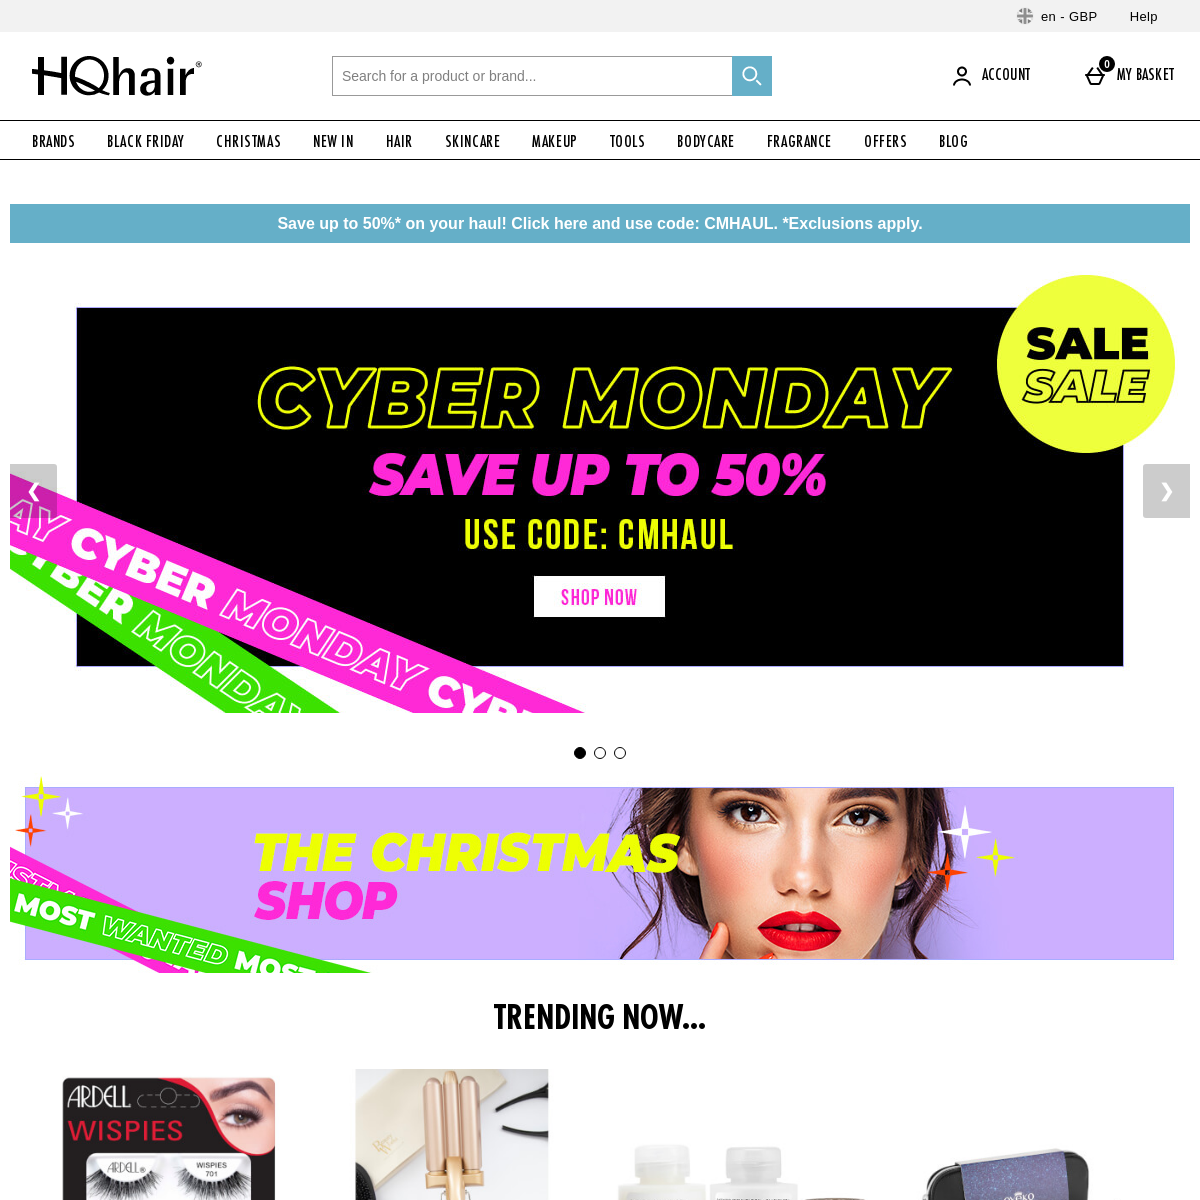 A complete backup of hqhair.com